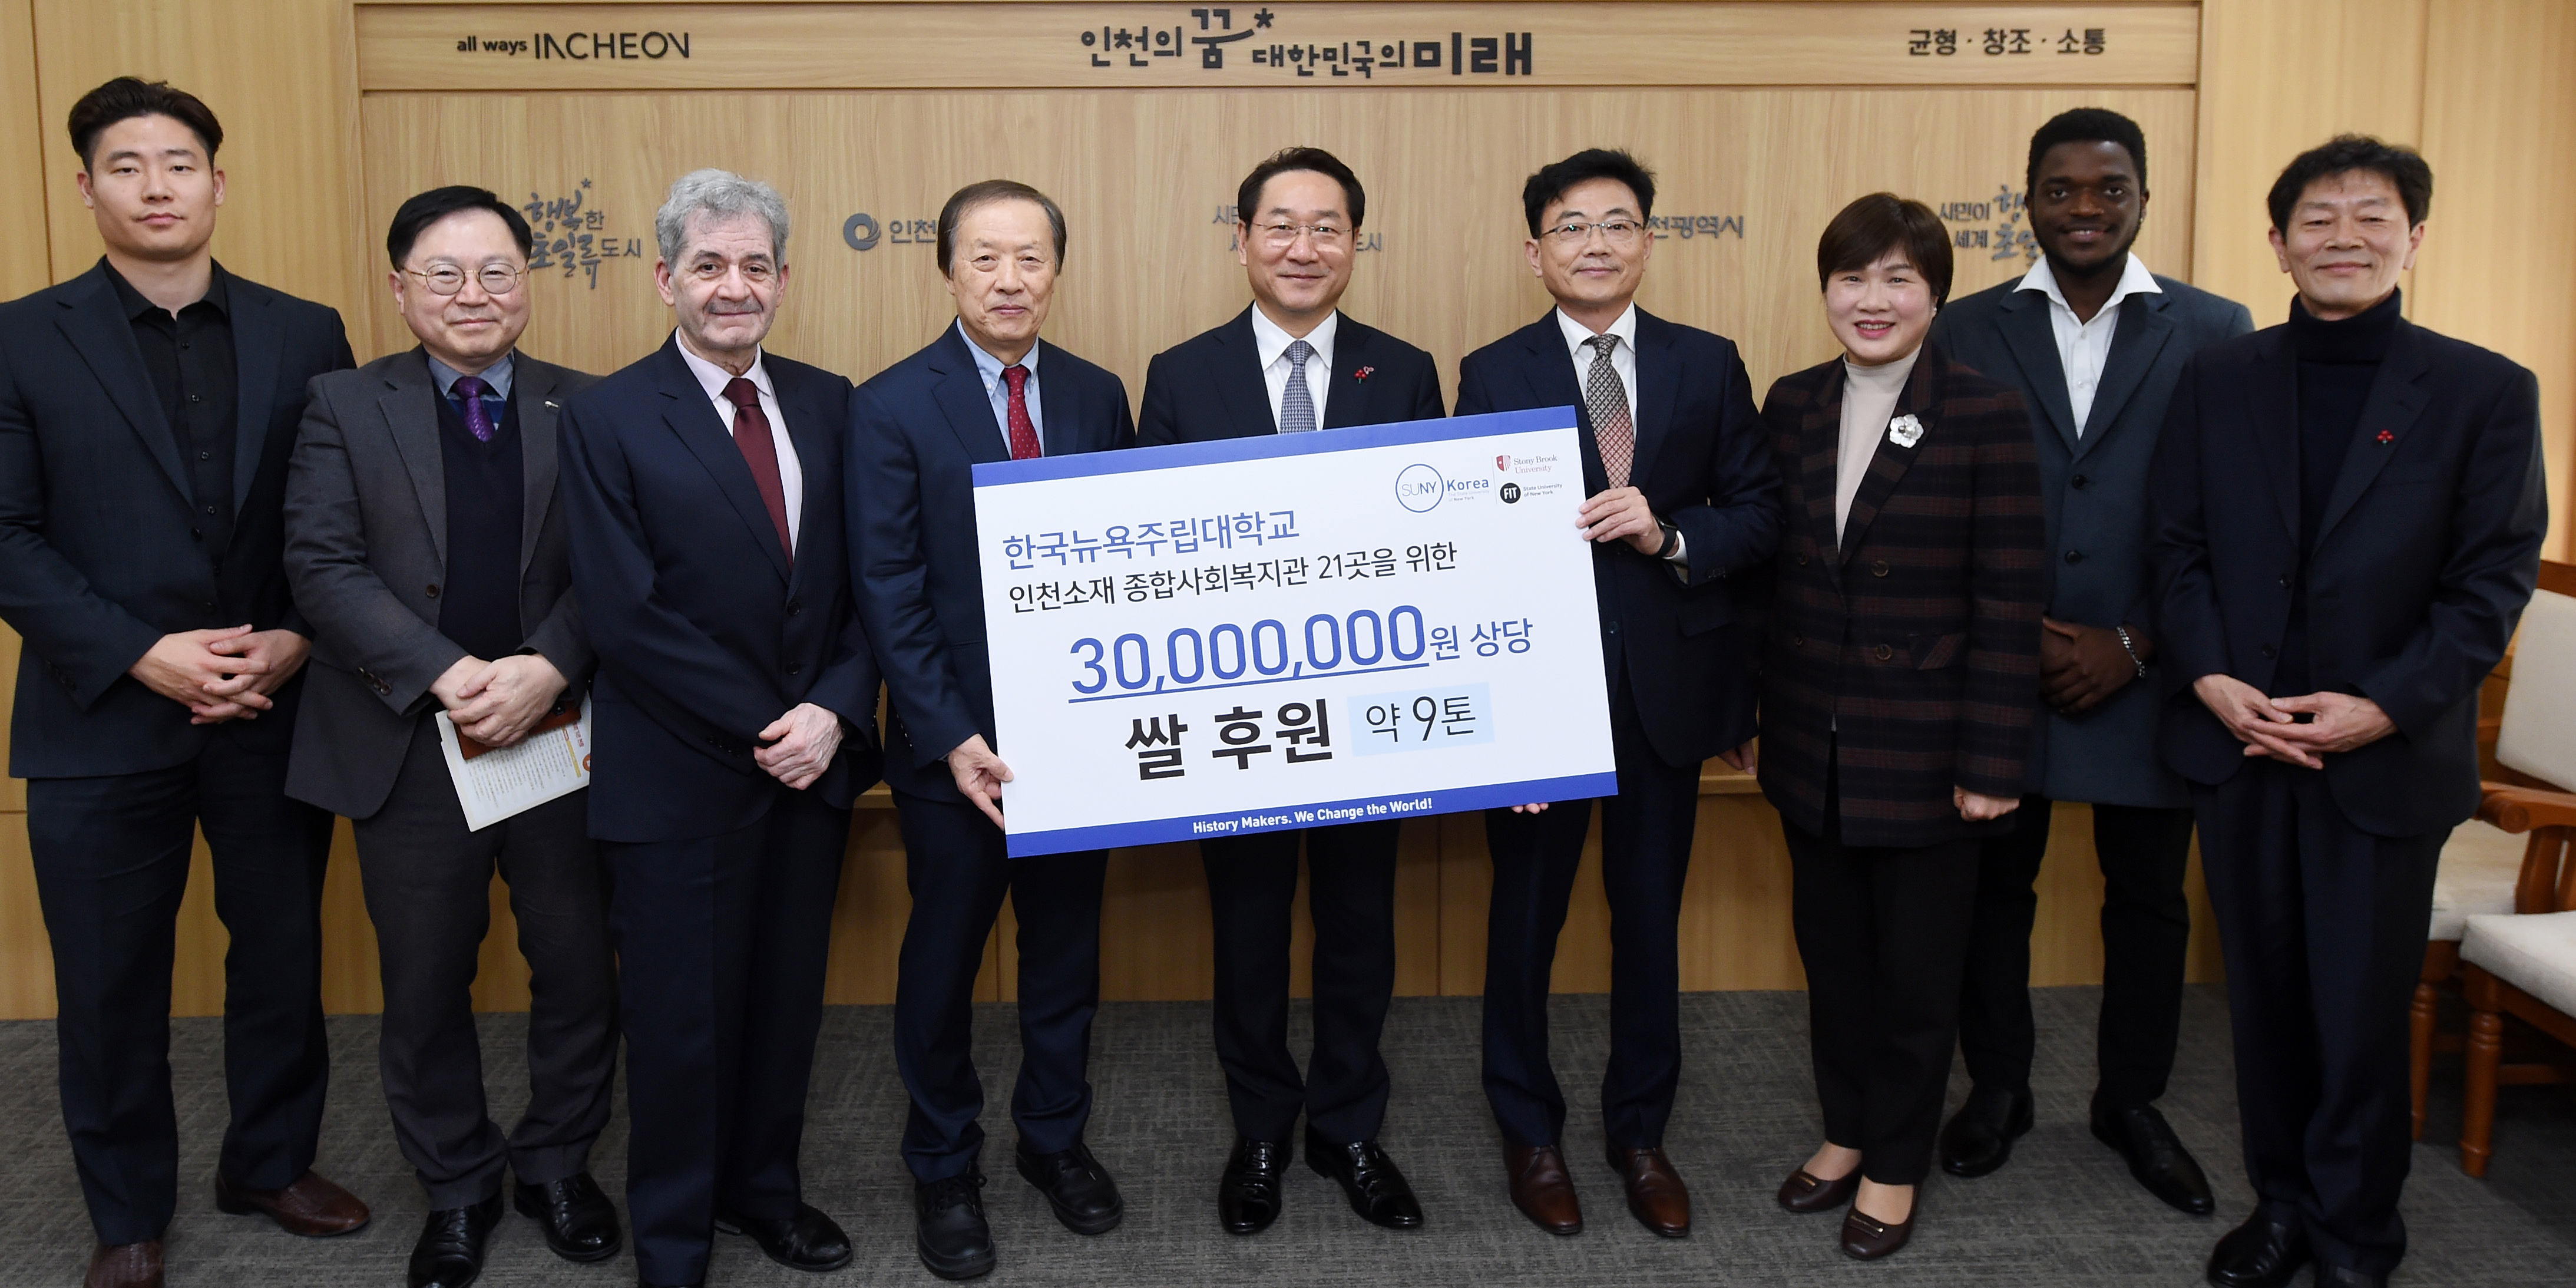 SUNY Korea Demonstrates Commitment to Community by Donating 30,000,000 KRW Worth of Rice image